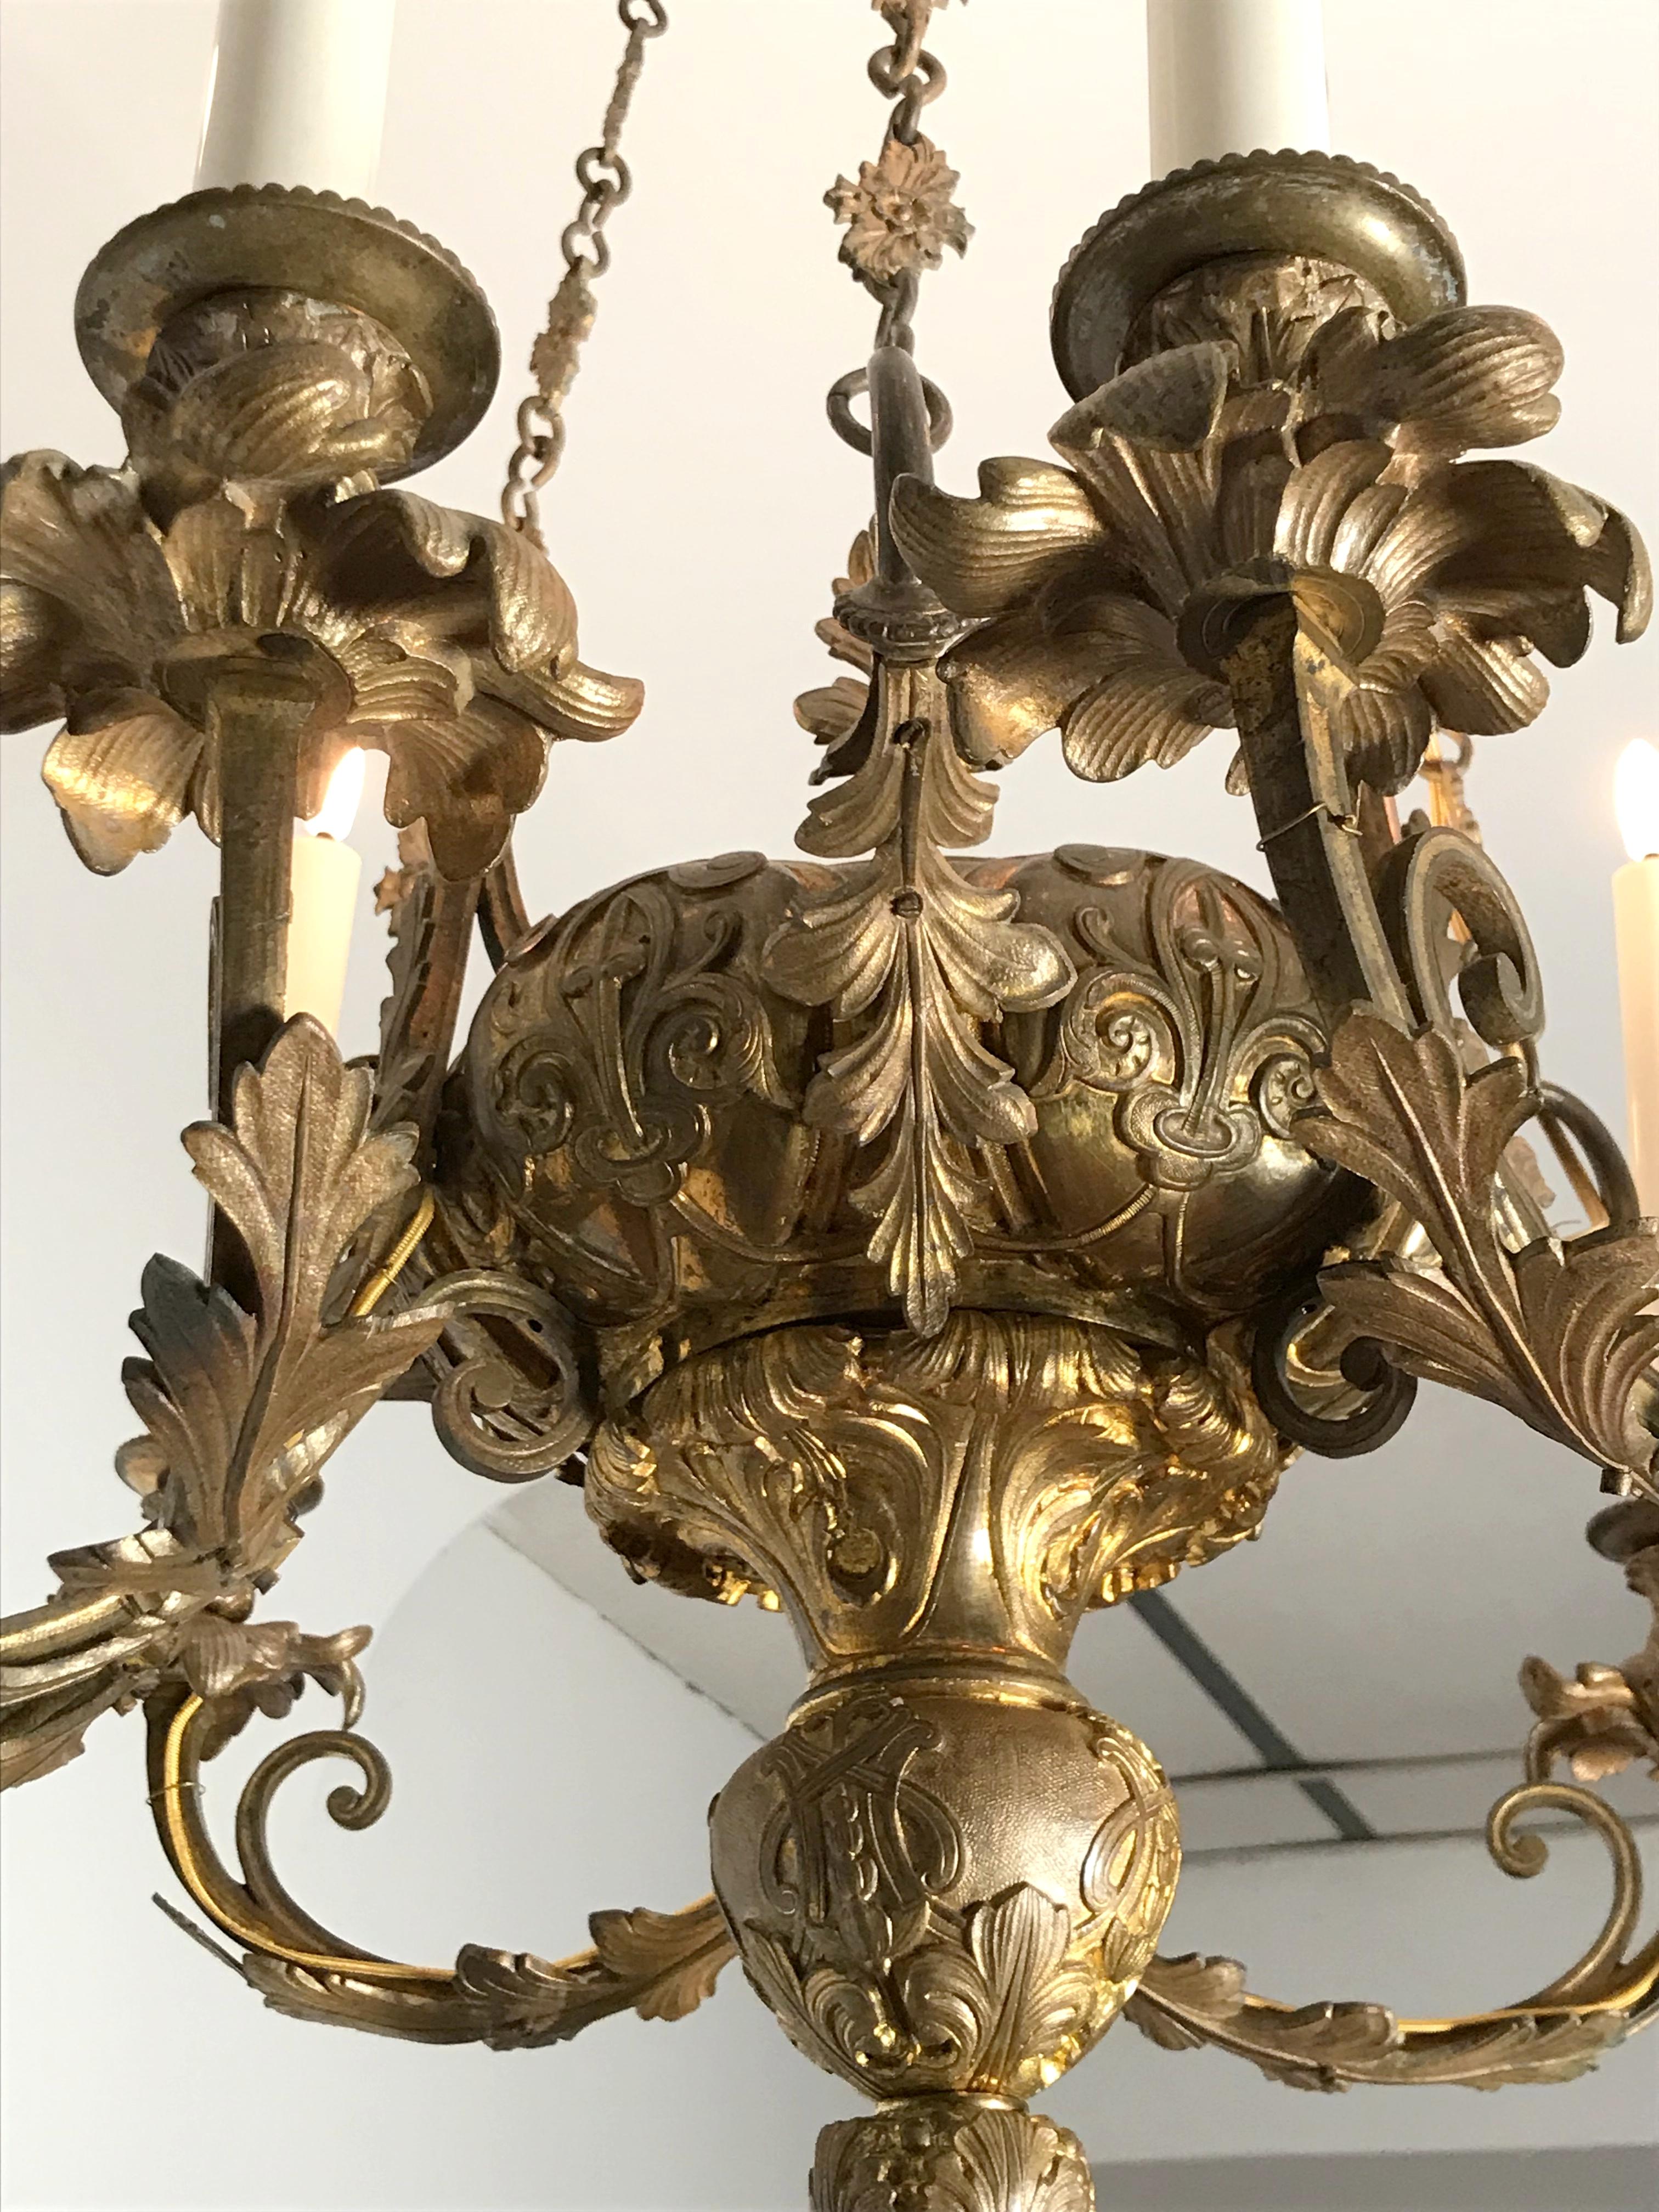 Nice chandelier in finely worked bronze, Napoleon III period.
Six-light arms fitted with 